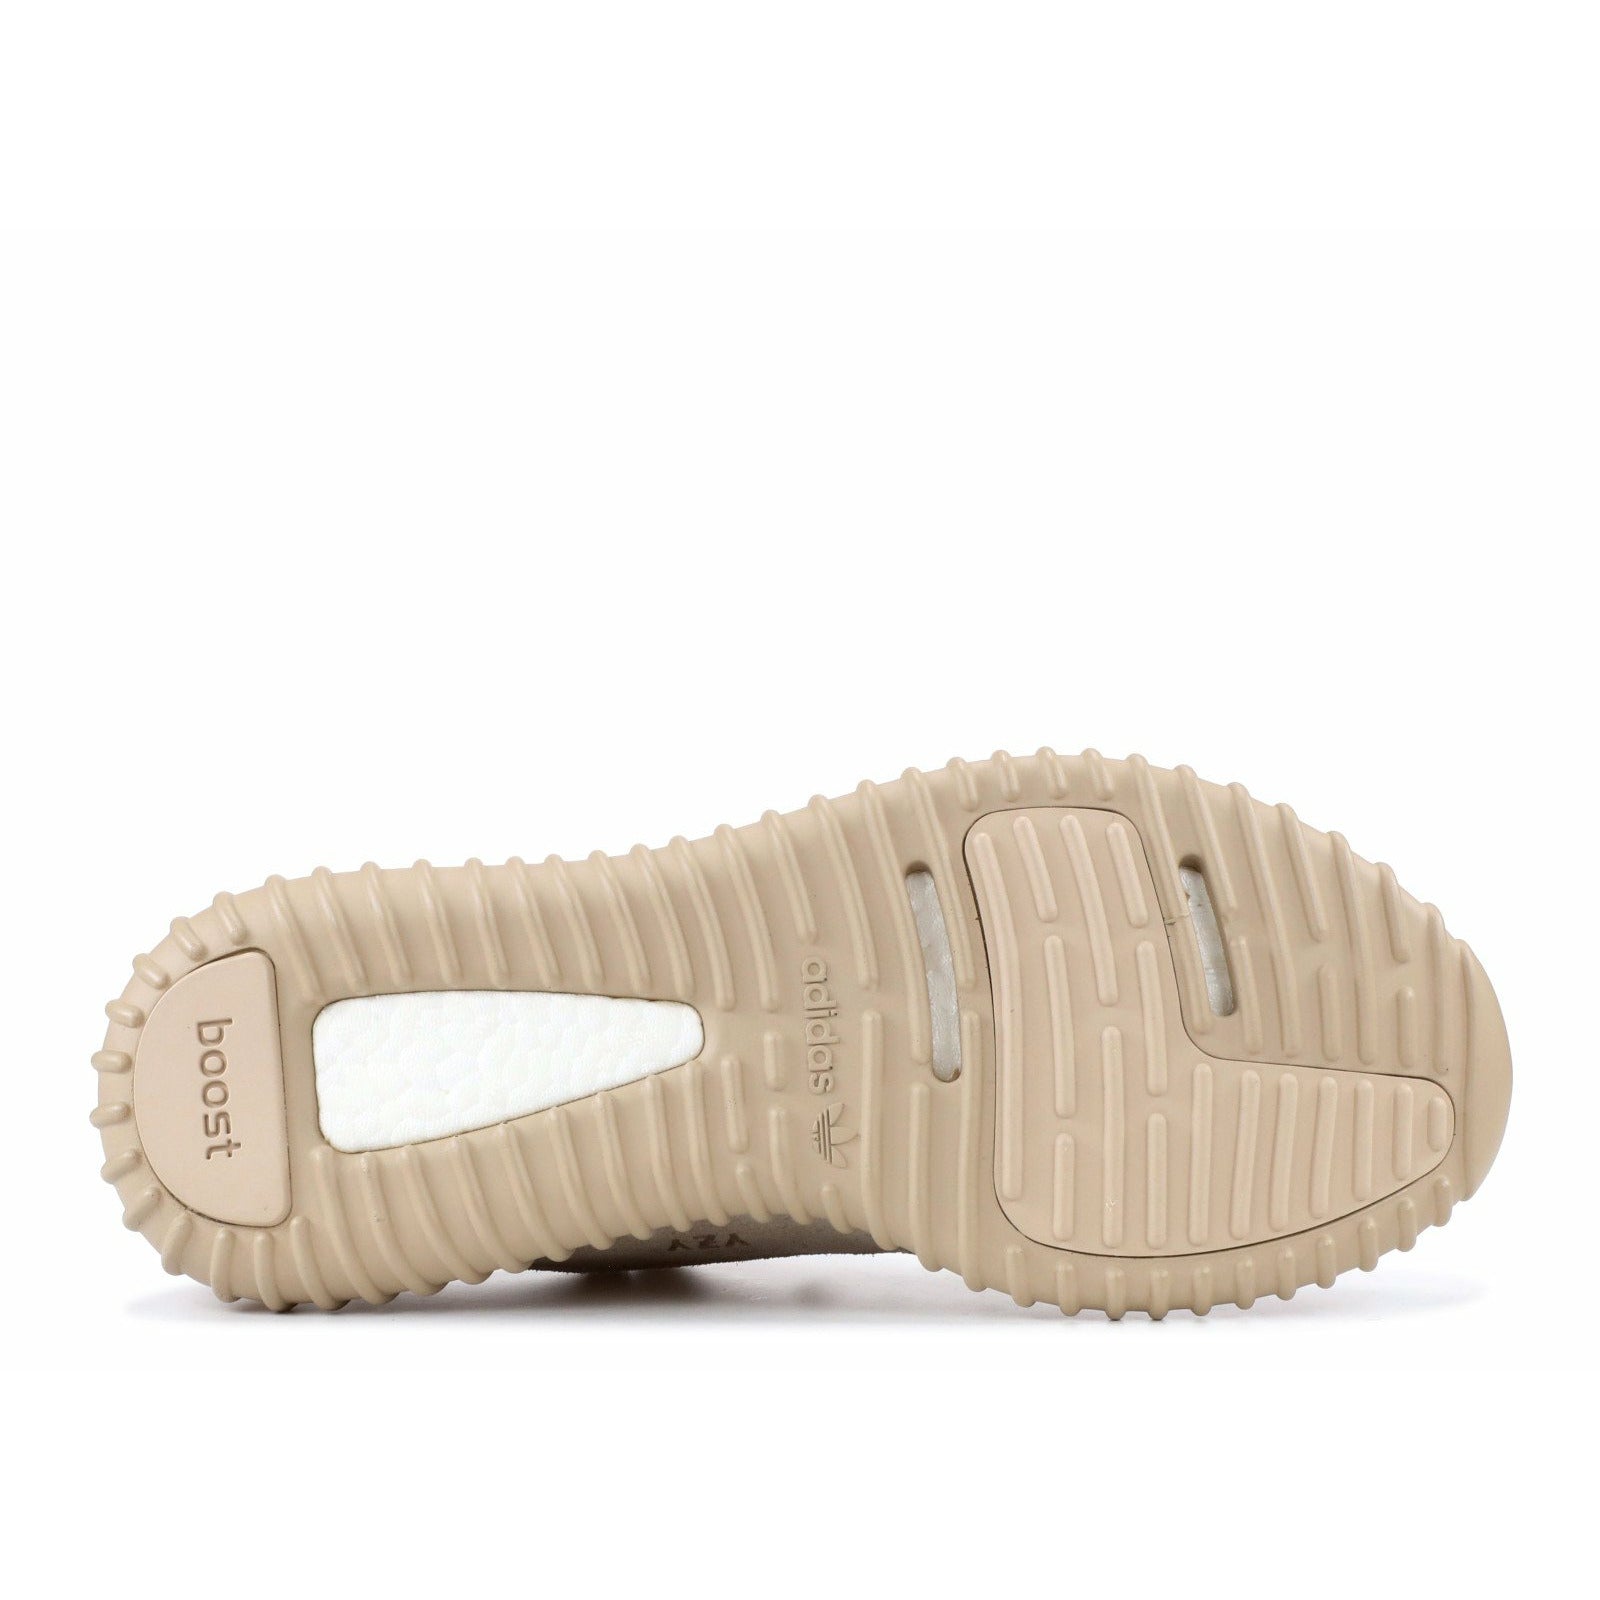 Adidas-Yeezy Boost 350 "Oxford Tan"-Adidas Yeezy Boost 350 "Oxford Tan" Sneakers
Product code: AQ2661 Colour: Light Stone/Oxford Tan-Light Stone Year of release: 2015
| MrSneaker is Europe's number 1 exclusive sneaker store.-mrsneaker